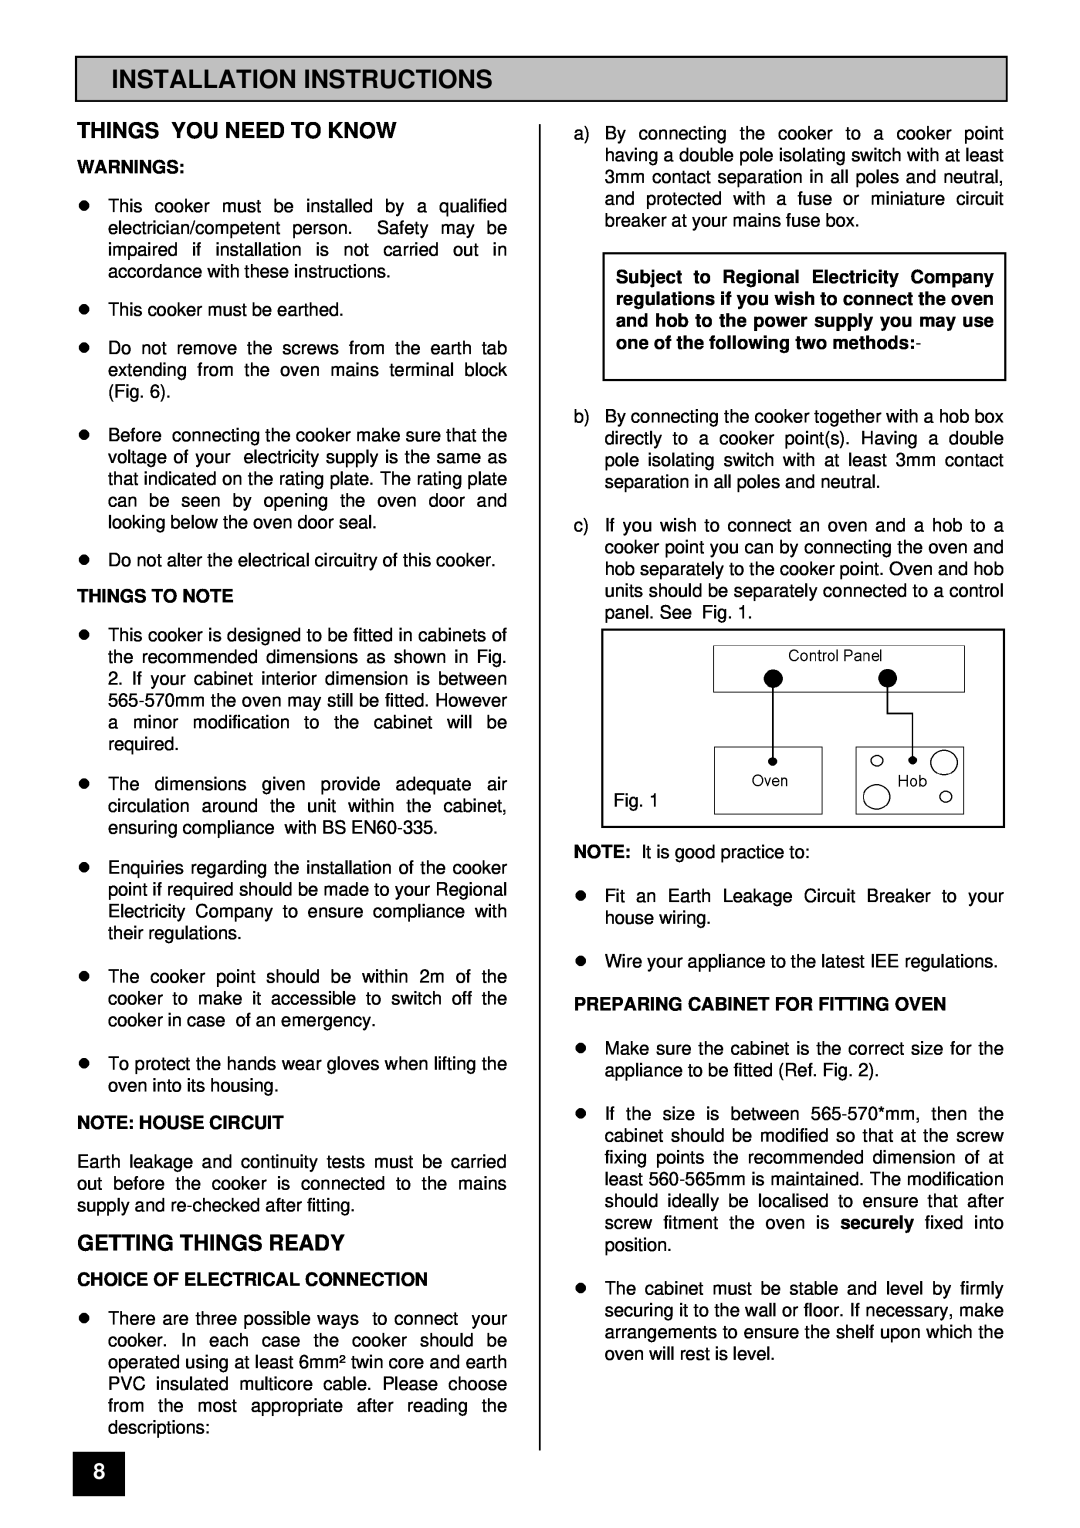 Tricity Bendix BD 921 Installation Instructions, Things You Need To Know, Getting Things Ready, Warnings, lTHINGS TO NOTE 